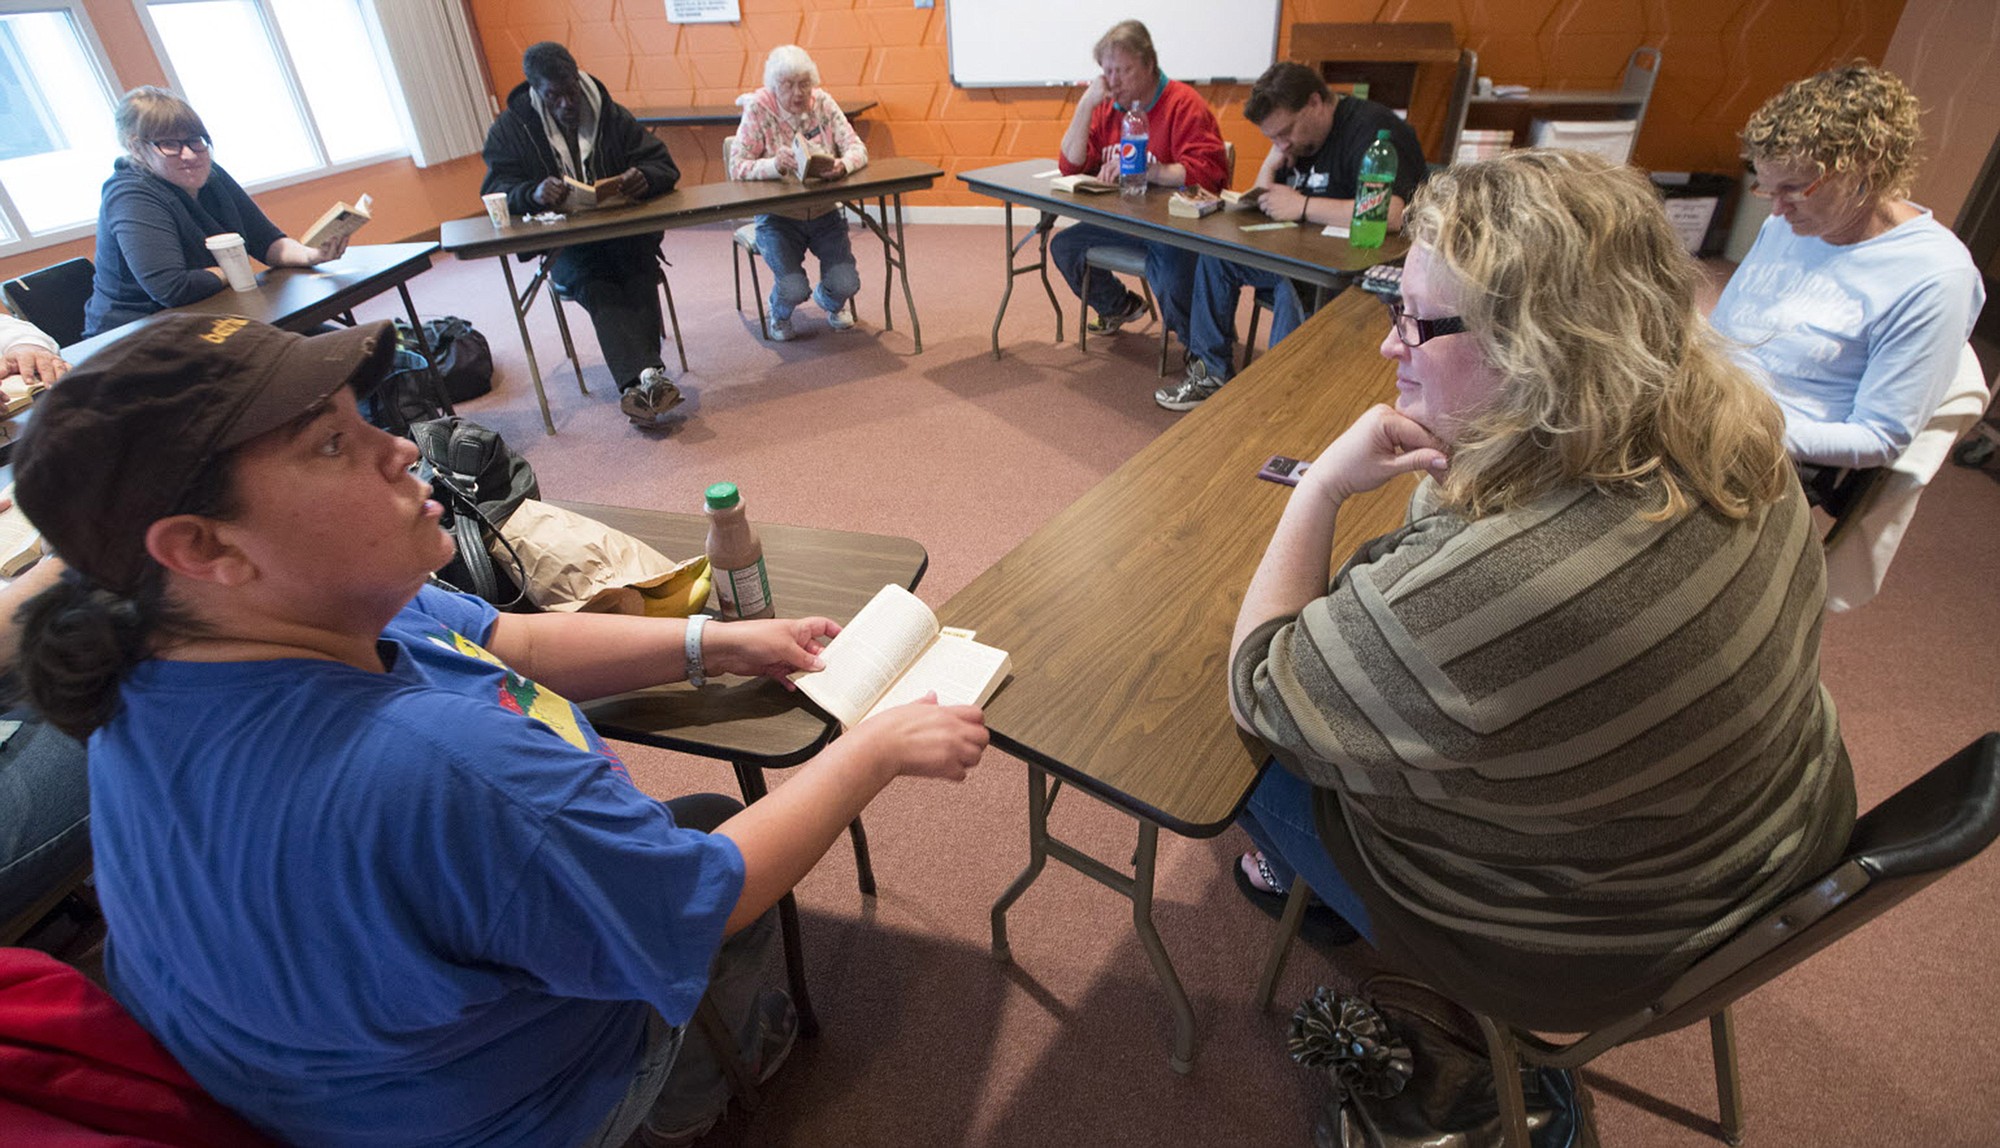 Mark Hoffman/Milwaukee Journal Sentinel
Linda Hansen, left, talks with discussion leader Dannelle Gay, right, during a book club gathering for homeless people at Bethel Lutheran Church in Madison, Wis.